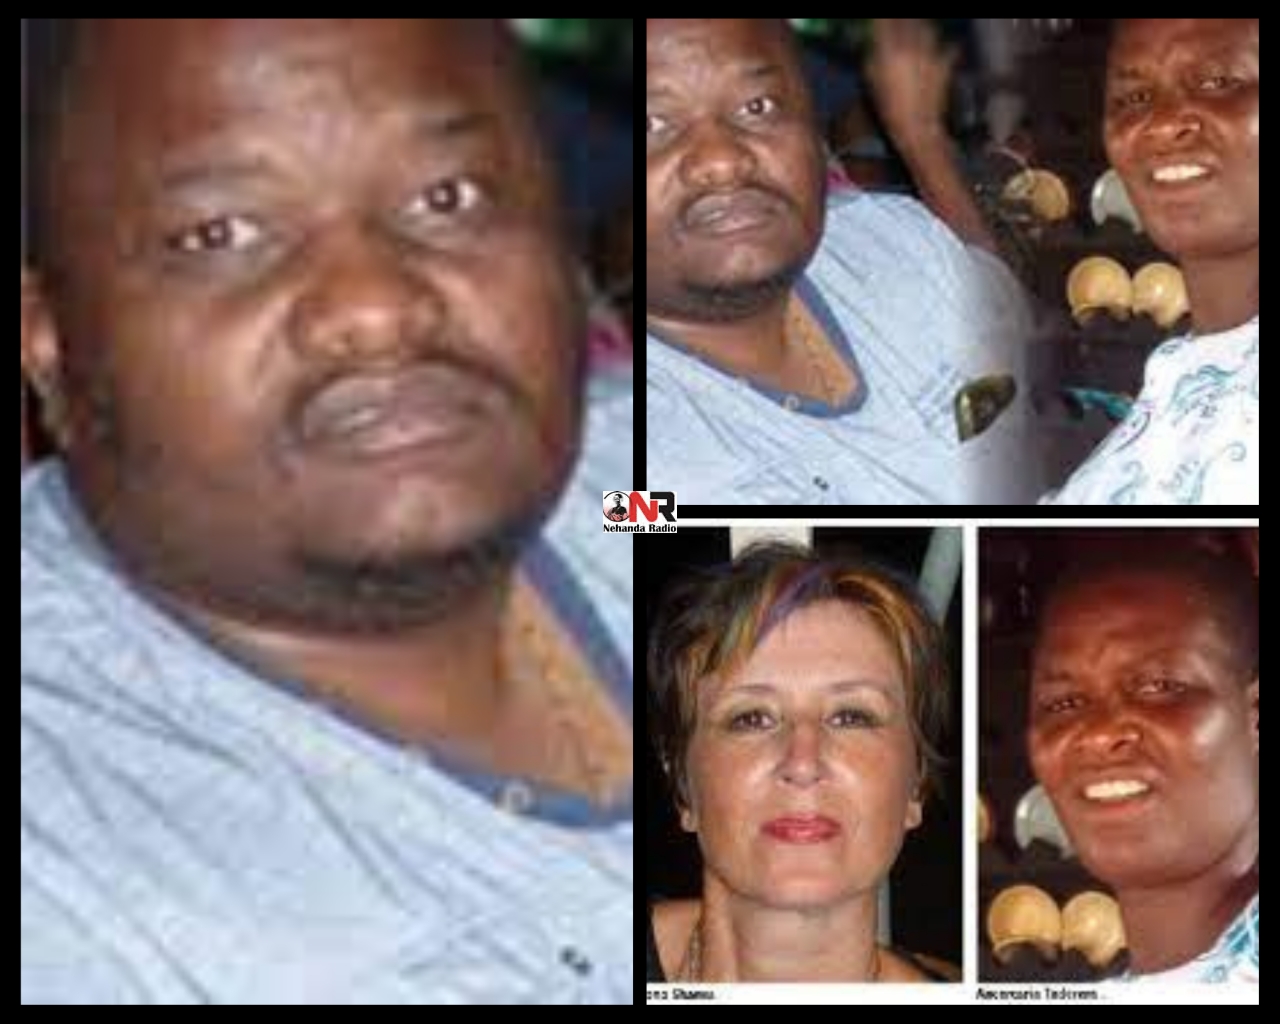 The judge ordered Provincial Medical Director, Dr Amadeus Shamu’s mistress Ancercaria Taderera to pay US$13 000 to his wife Tatyana Shamu.